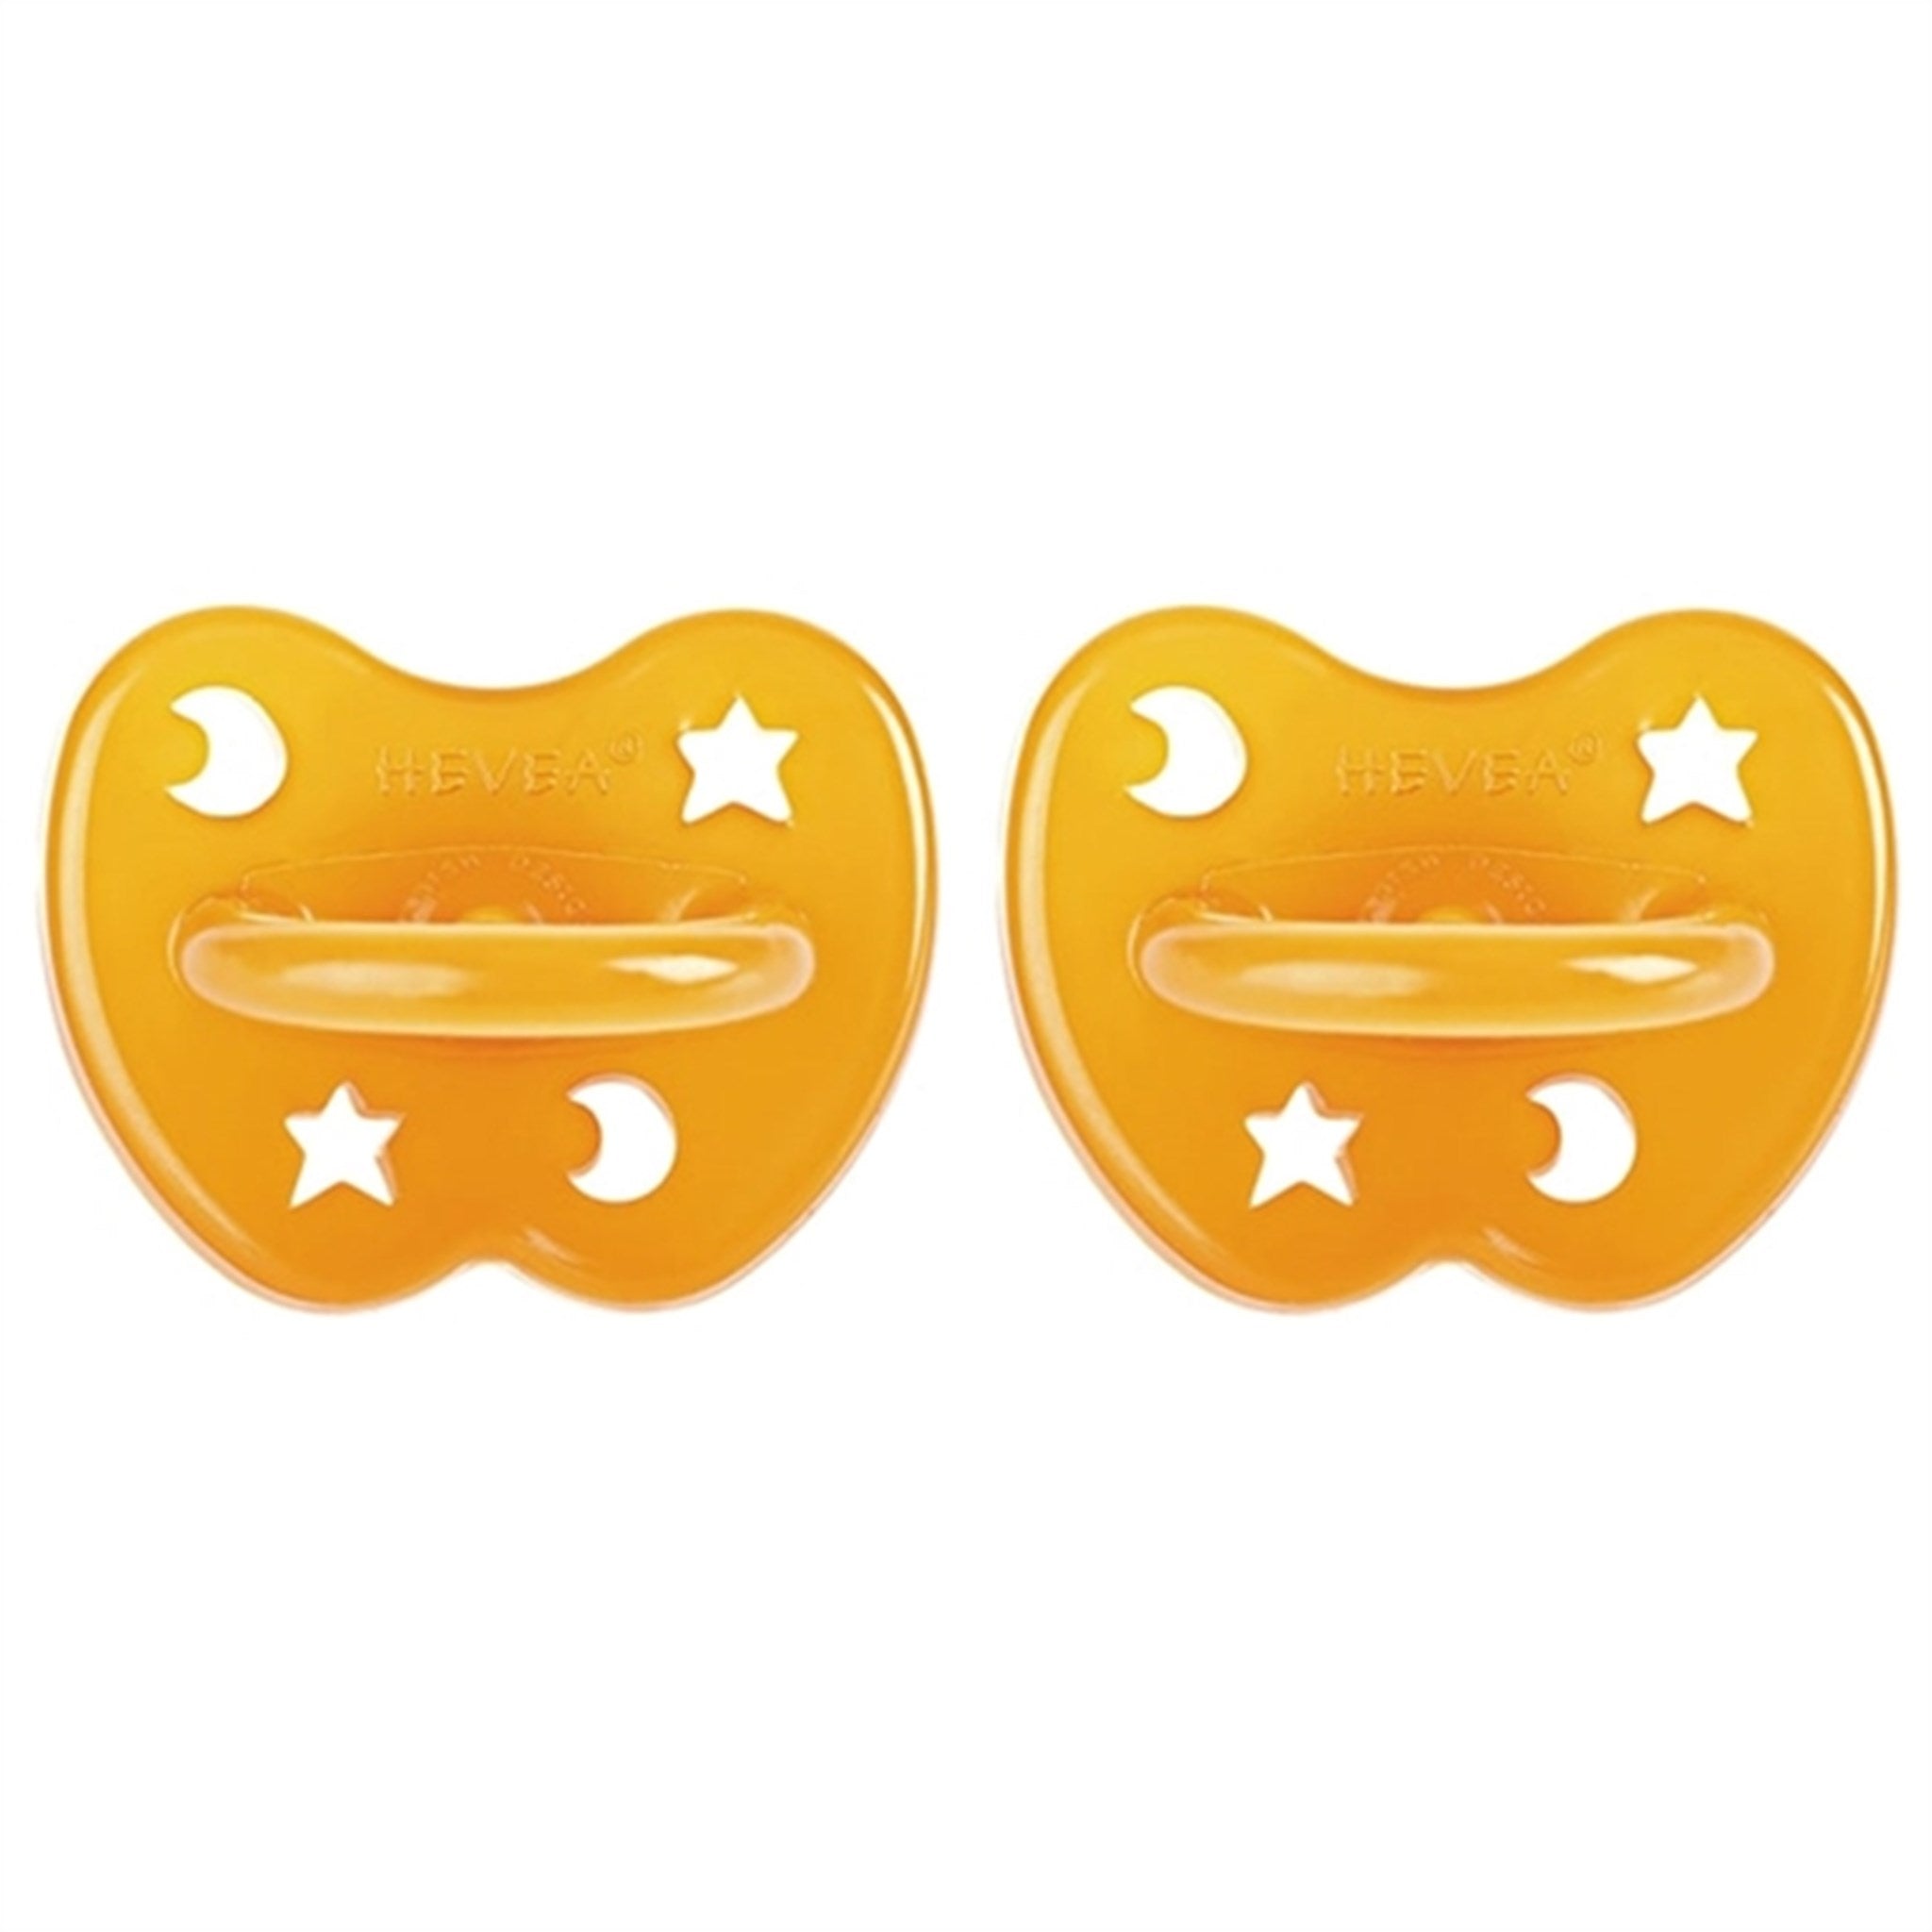 Hevea Pacifier 2-Pack Orthodontic Classic 3